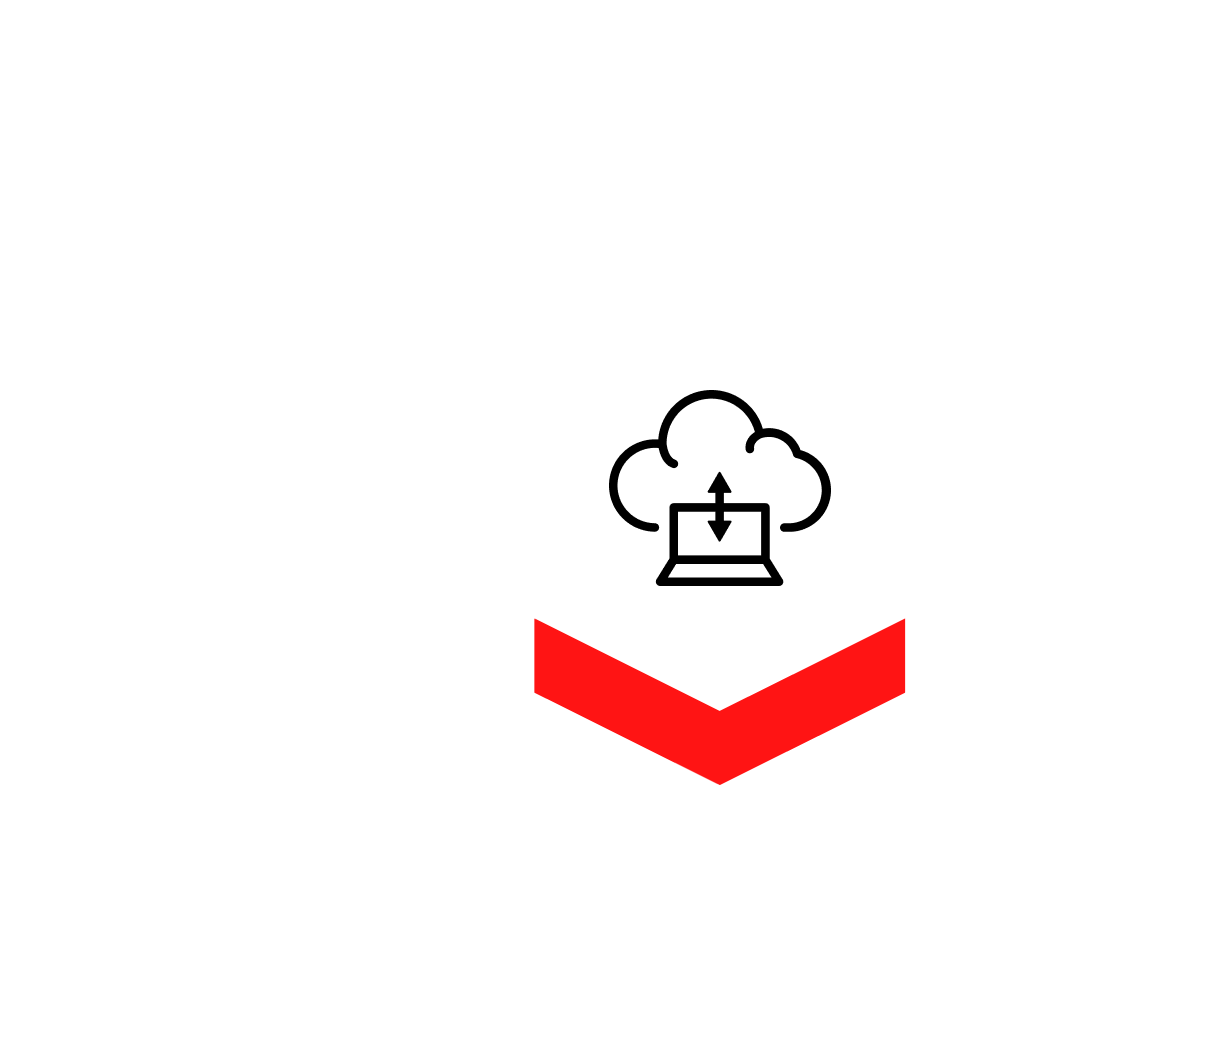 Production-ready cloud icon